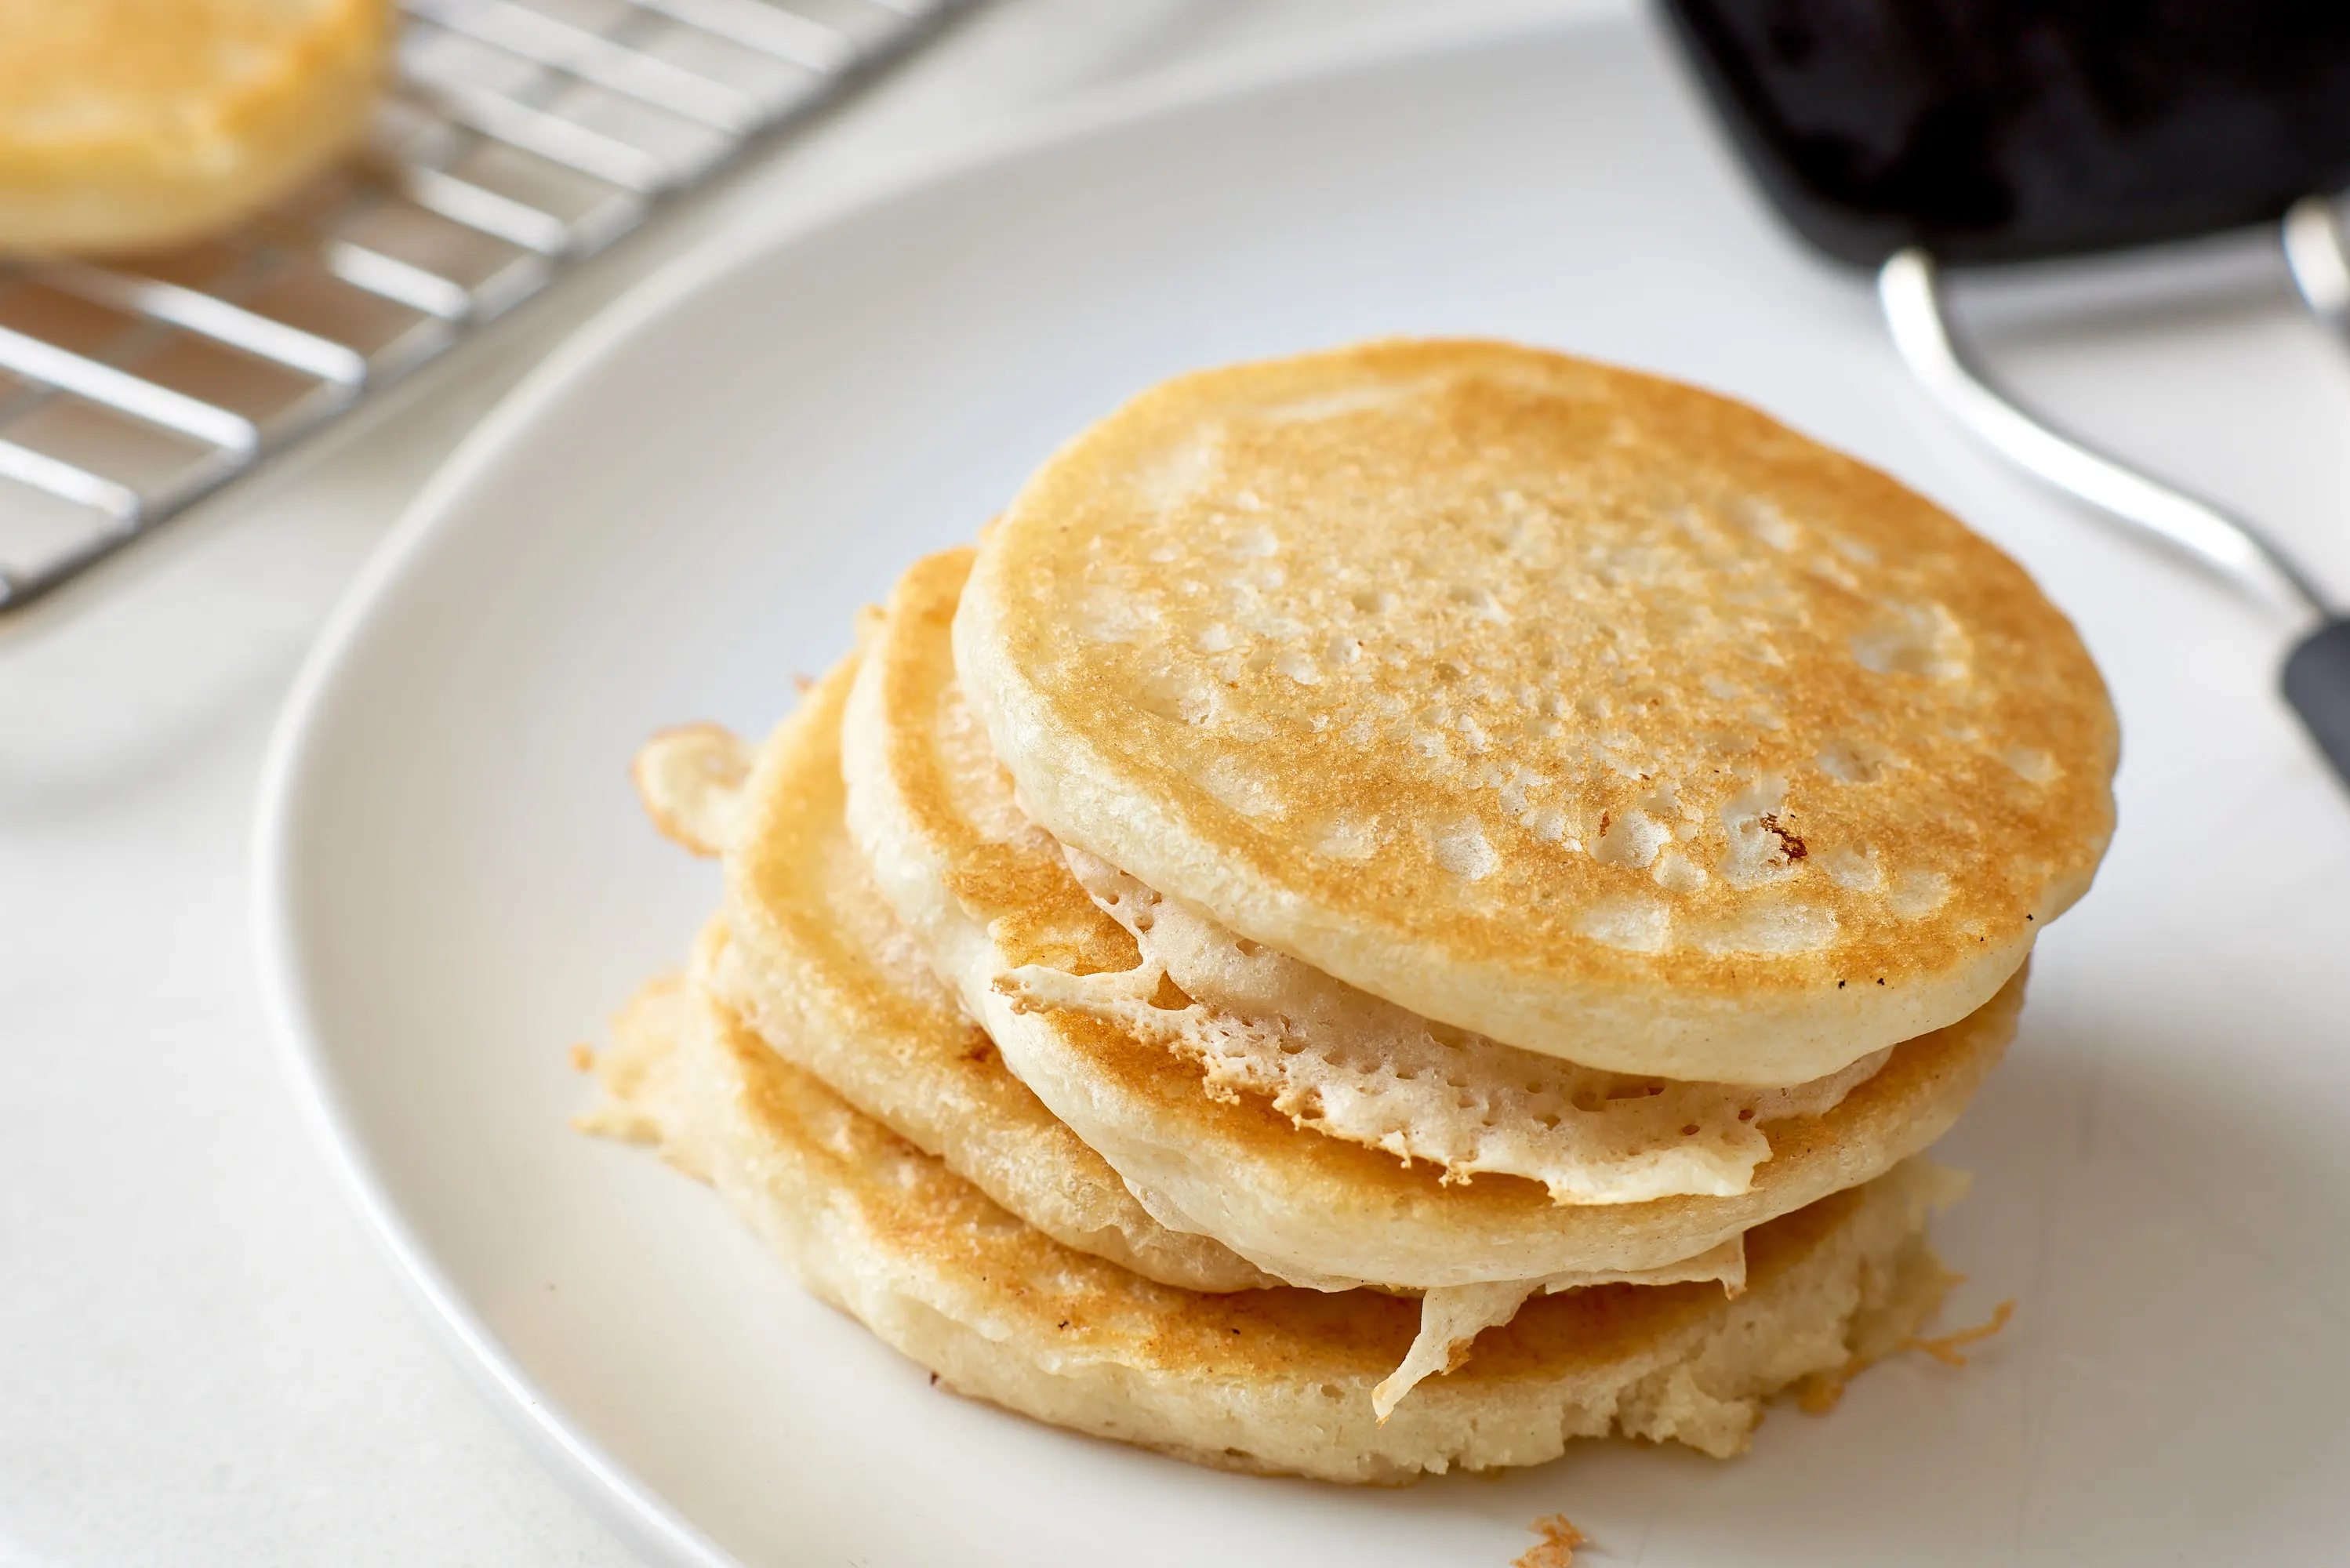 How To Make Pancakes Without Eggs, Flour Or Milk - Recipes.net